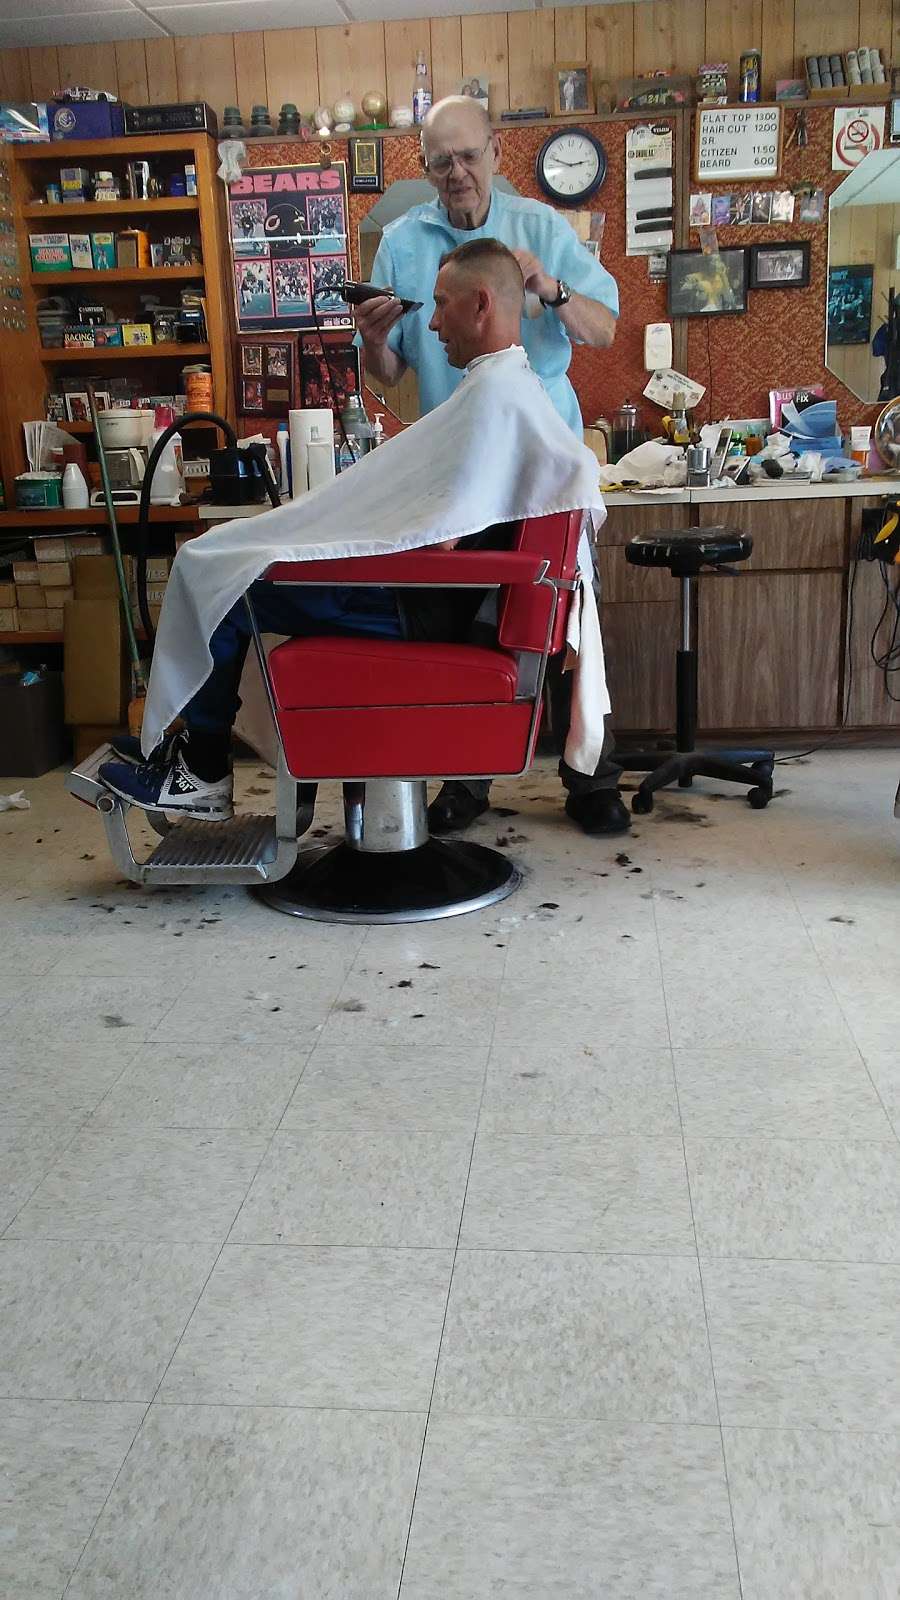 Dons Barber Shop | 125 E Barker Ave, Michigan City, IN 46360 | Phone: (219) 879-9022